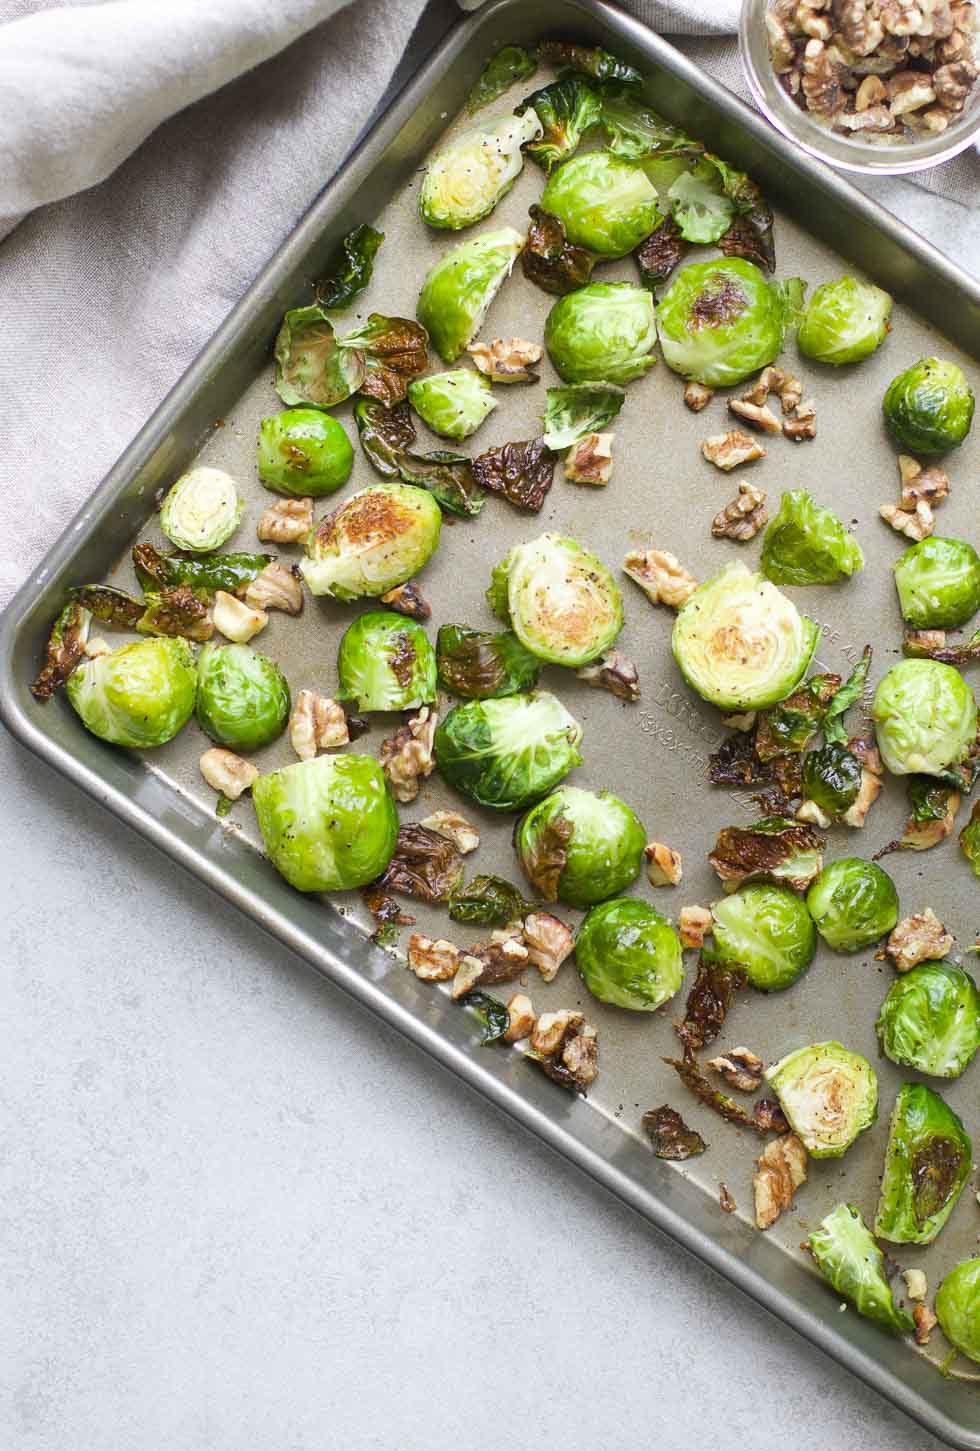 How to Make Roasted Brussels Sprouts